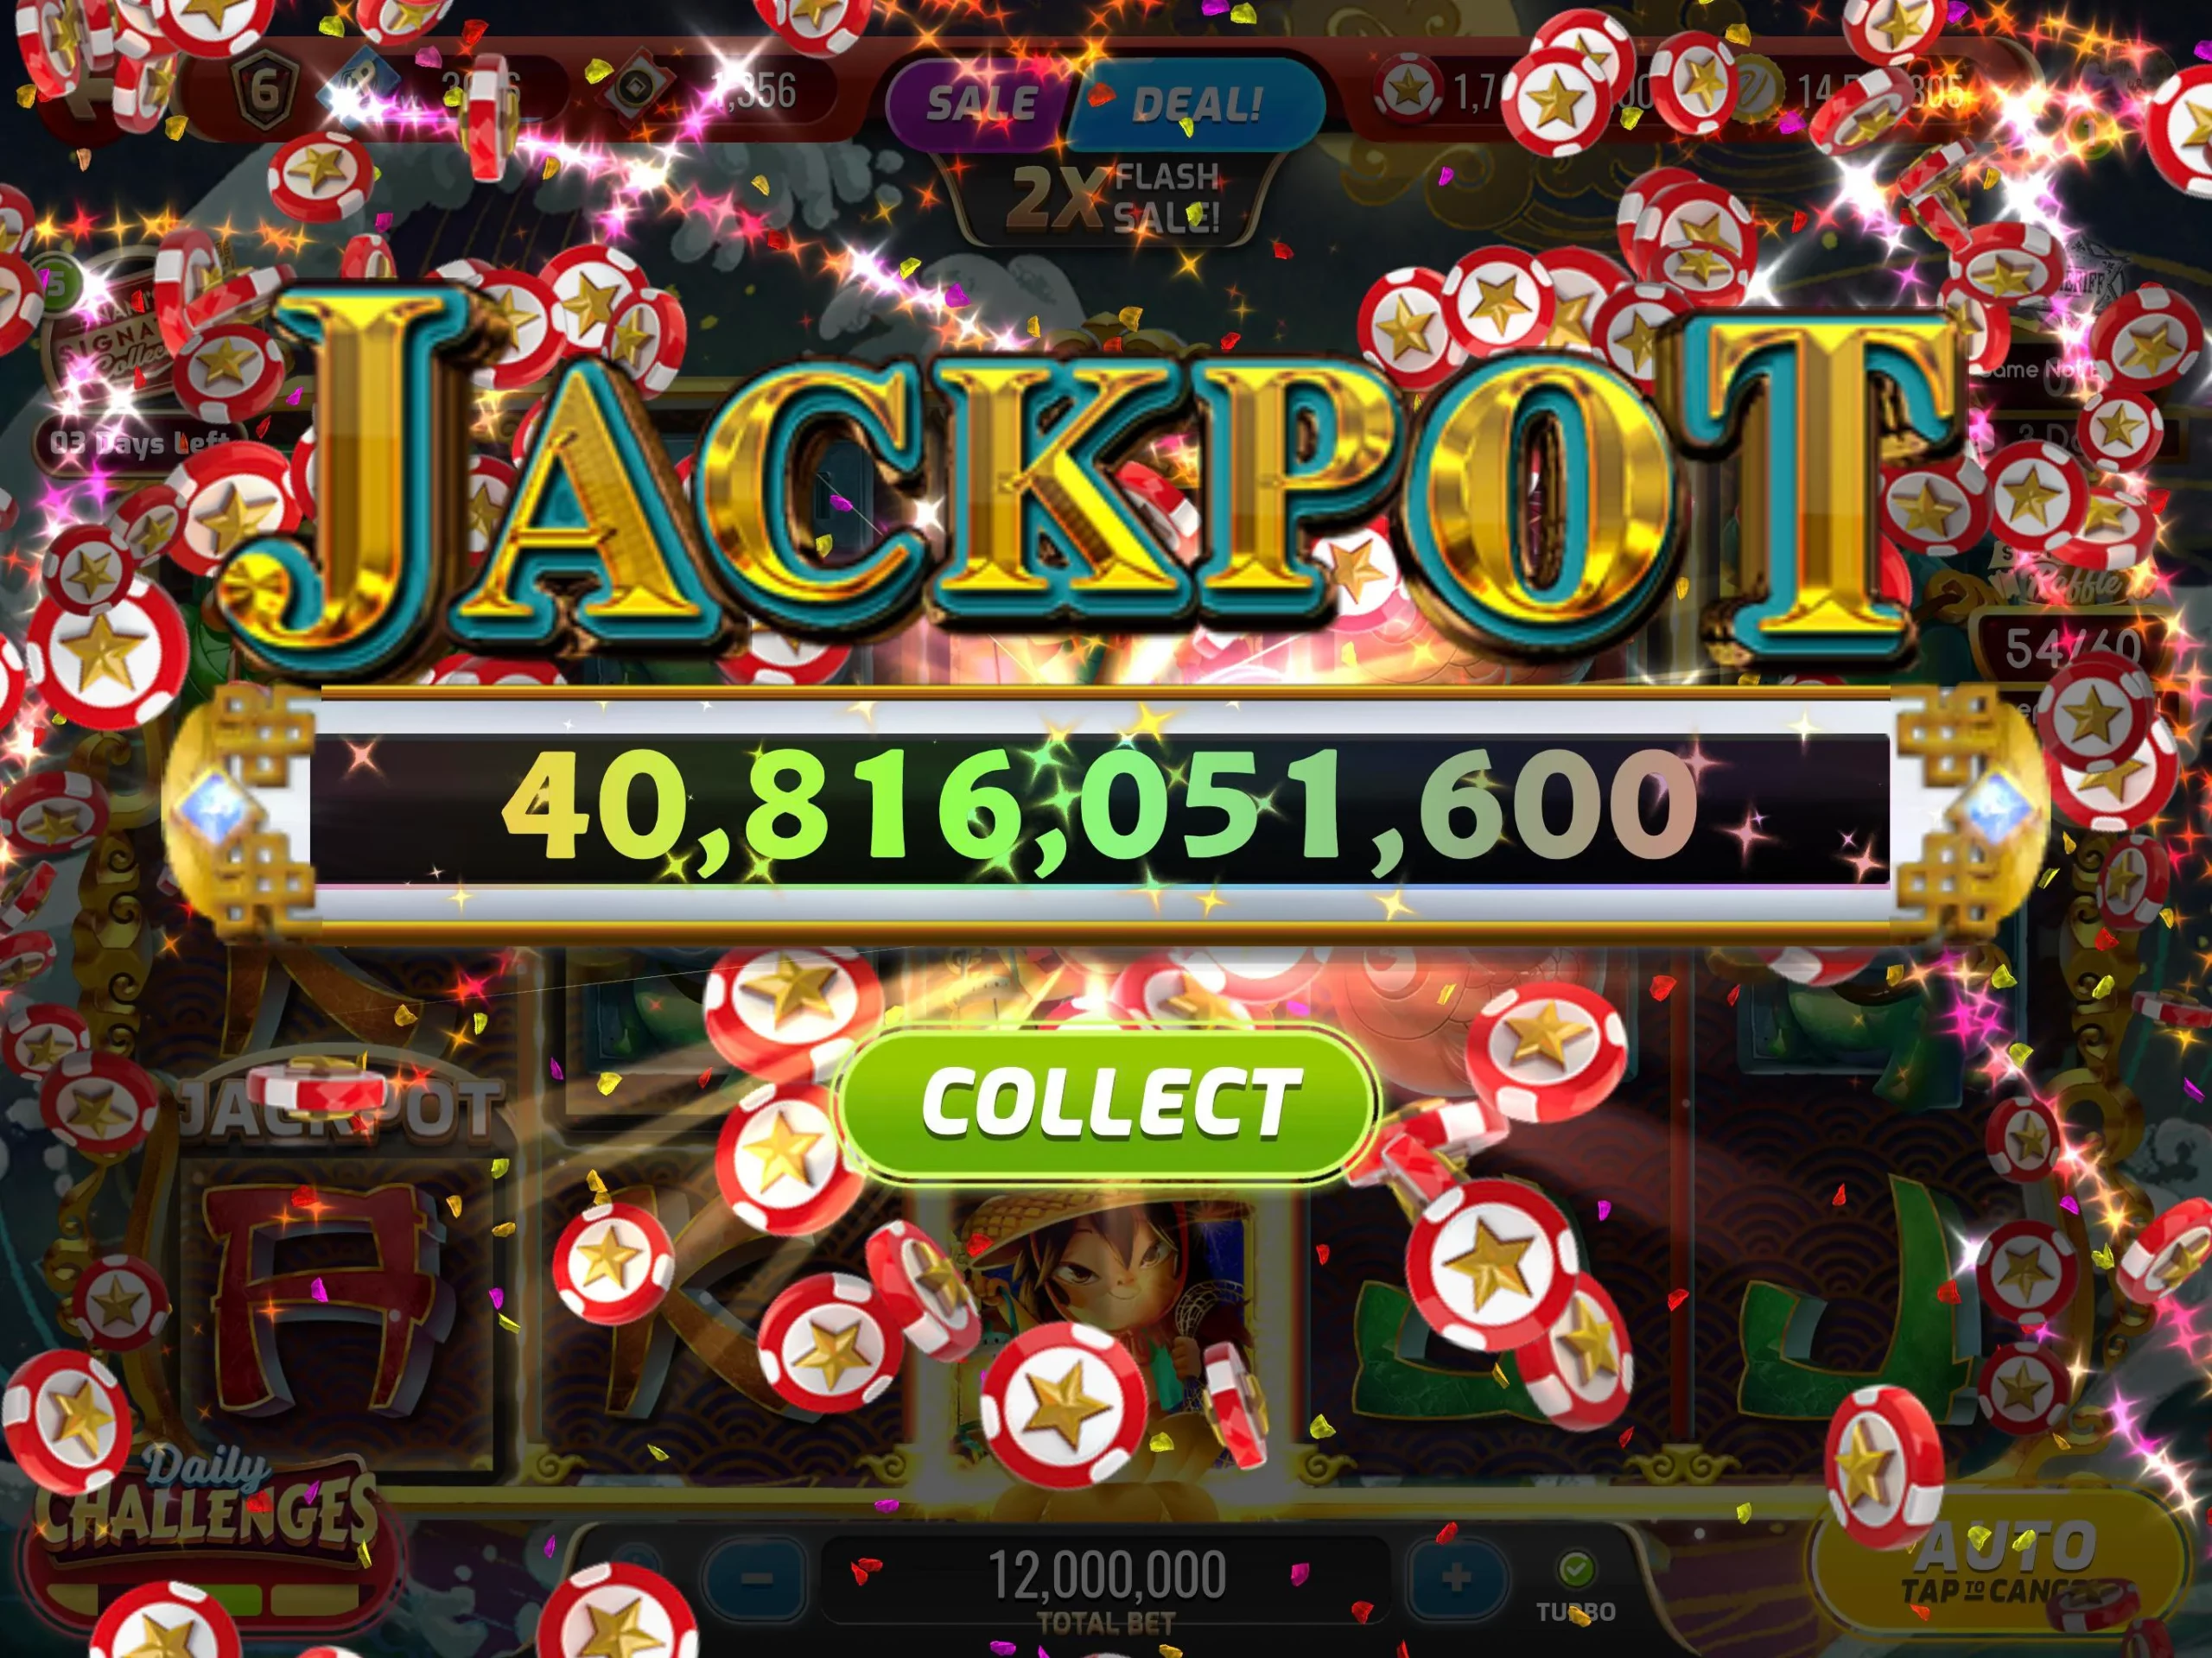 Biggest Non-Uk Jackpots Of All Time: Who Won Them And How?